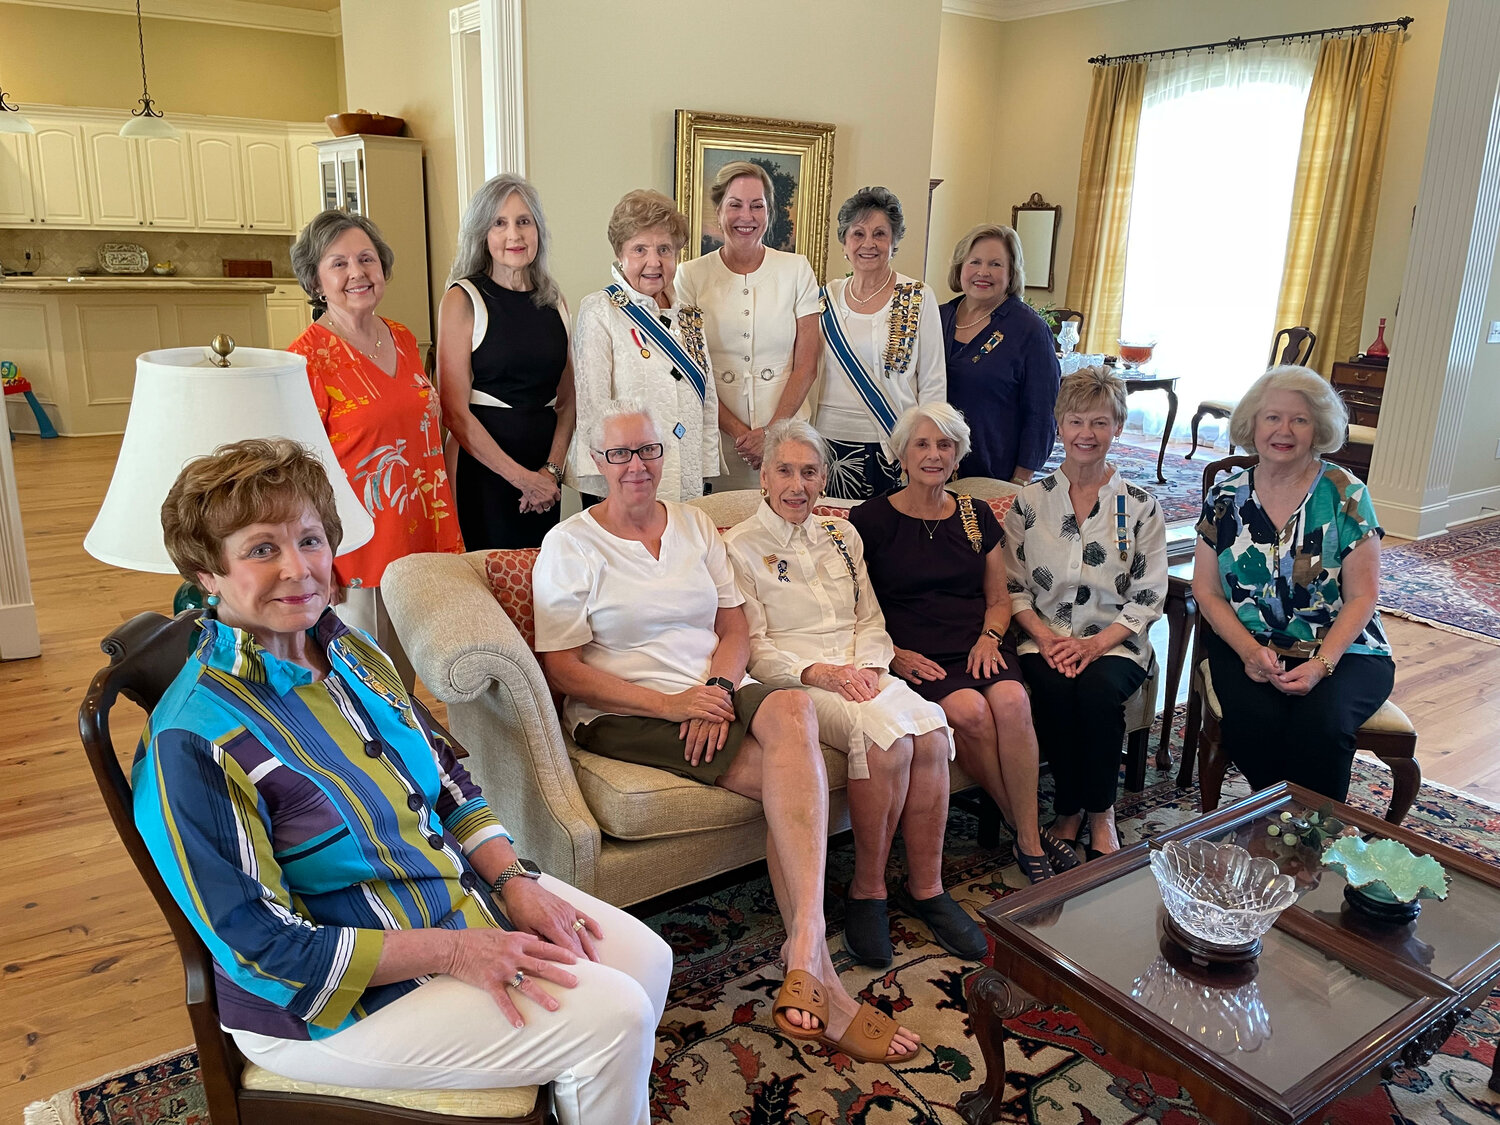 Pictured, back row from left, are Regina Boyles, granddaughter Barbara Carraway, Dot Ward, granddaughter Mary Mills, Cindy Phillips and Jan McSpadden (Front) Bonnie Brannan, Julia Hodges, Kay McKinnon, Ginger Cocke, Ann Webb and Lisa Magee.